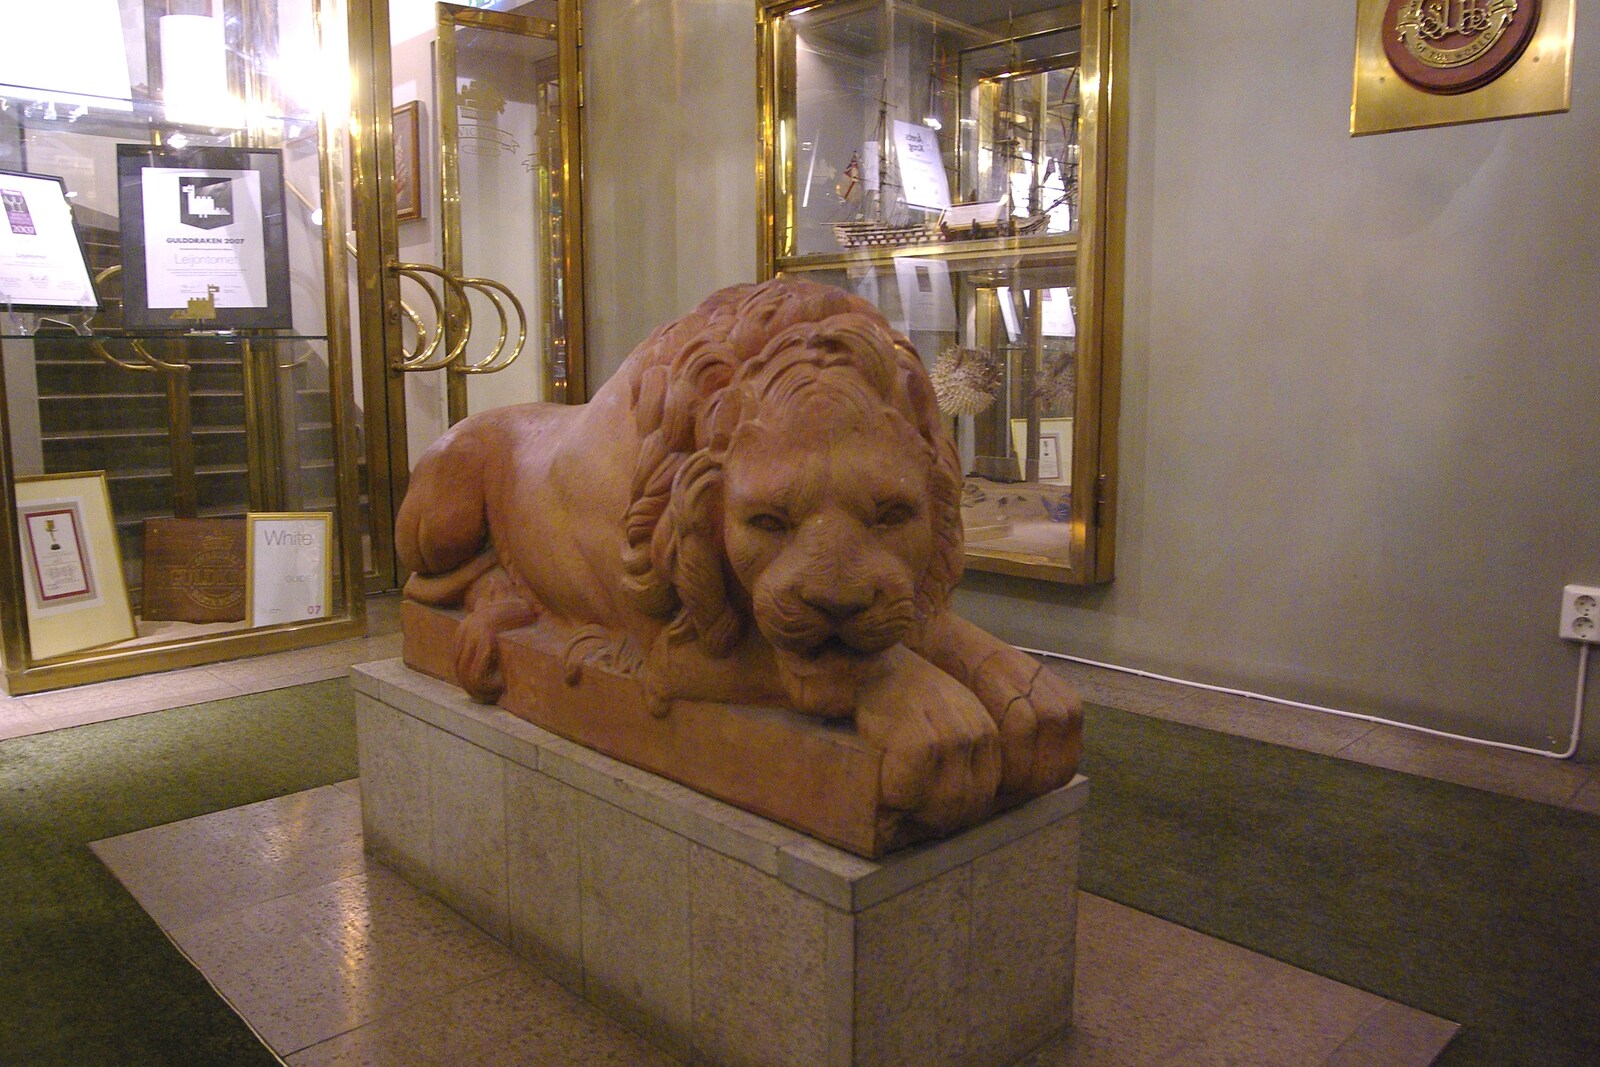 A scary lion in the hotel lobby from Gamla Stan, Stockholm, Sweden - 15th December 2007